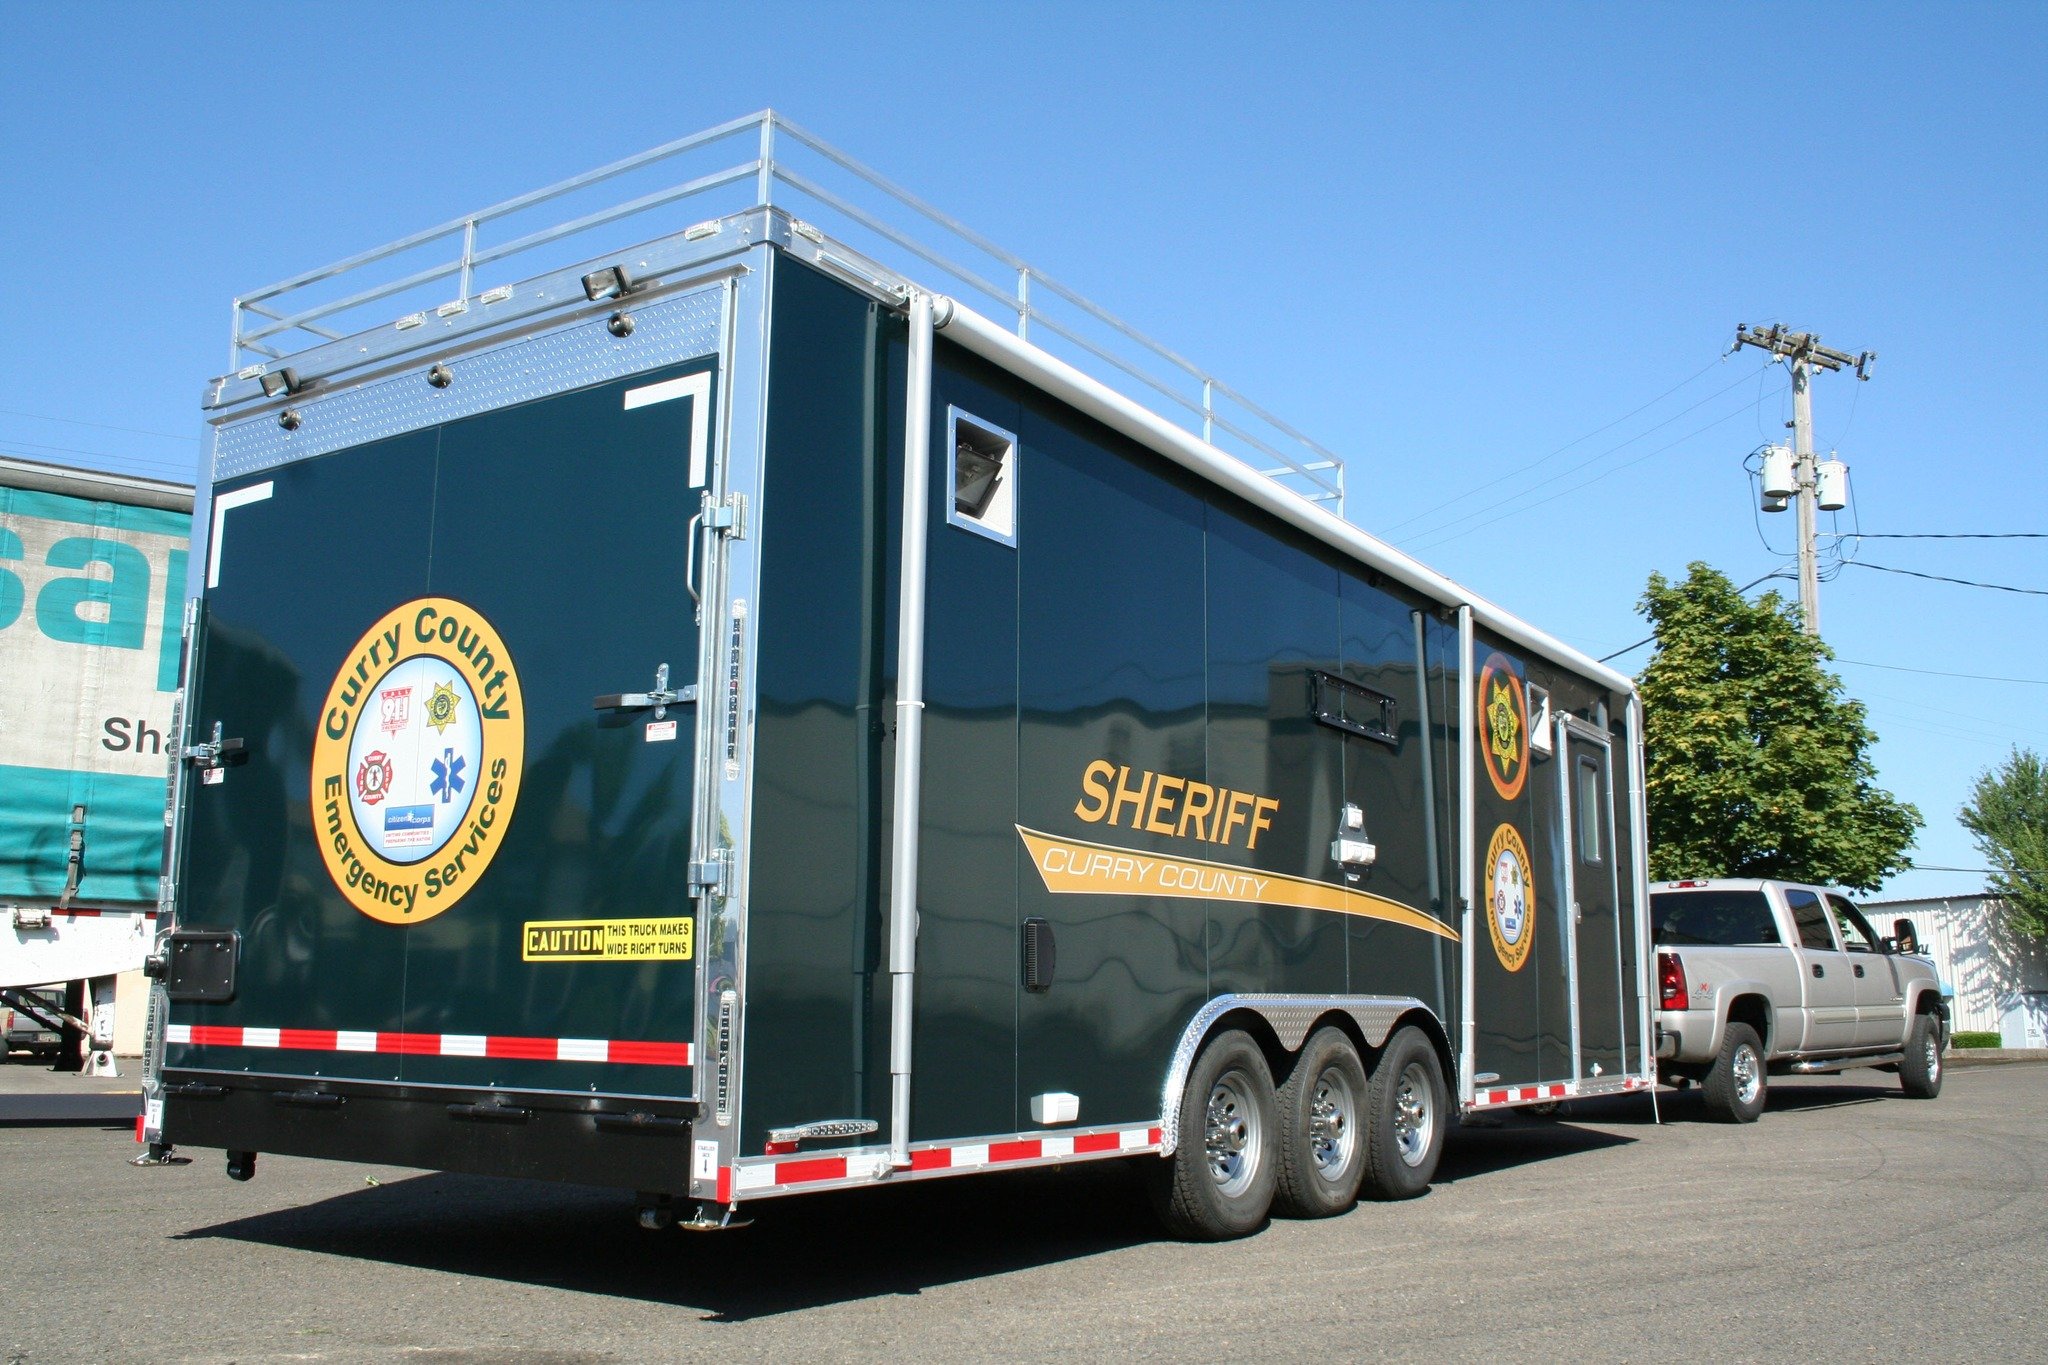 Western Shelter Command and Control trailers keep you connected and in charge. 🫡

Our mobile offices are customizable and comfortable, allowing you to focus on what matters most!

#MobileCommandCenter
#EmergencyResponse 
#WesternShelter